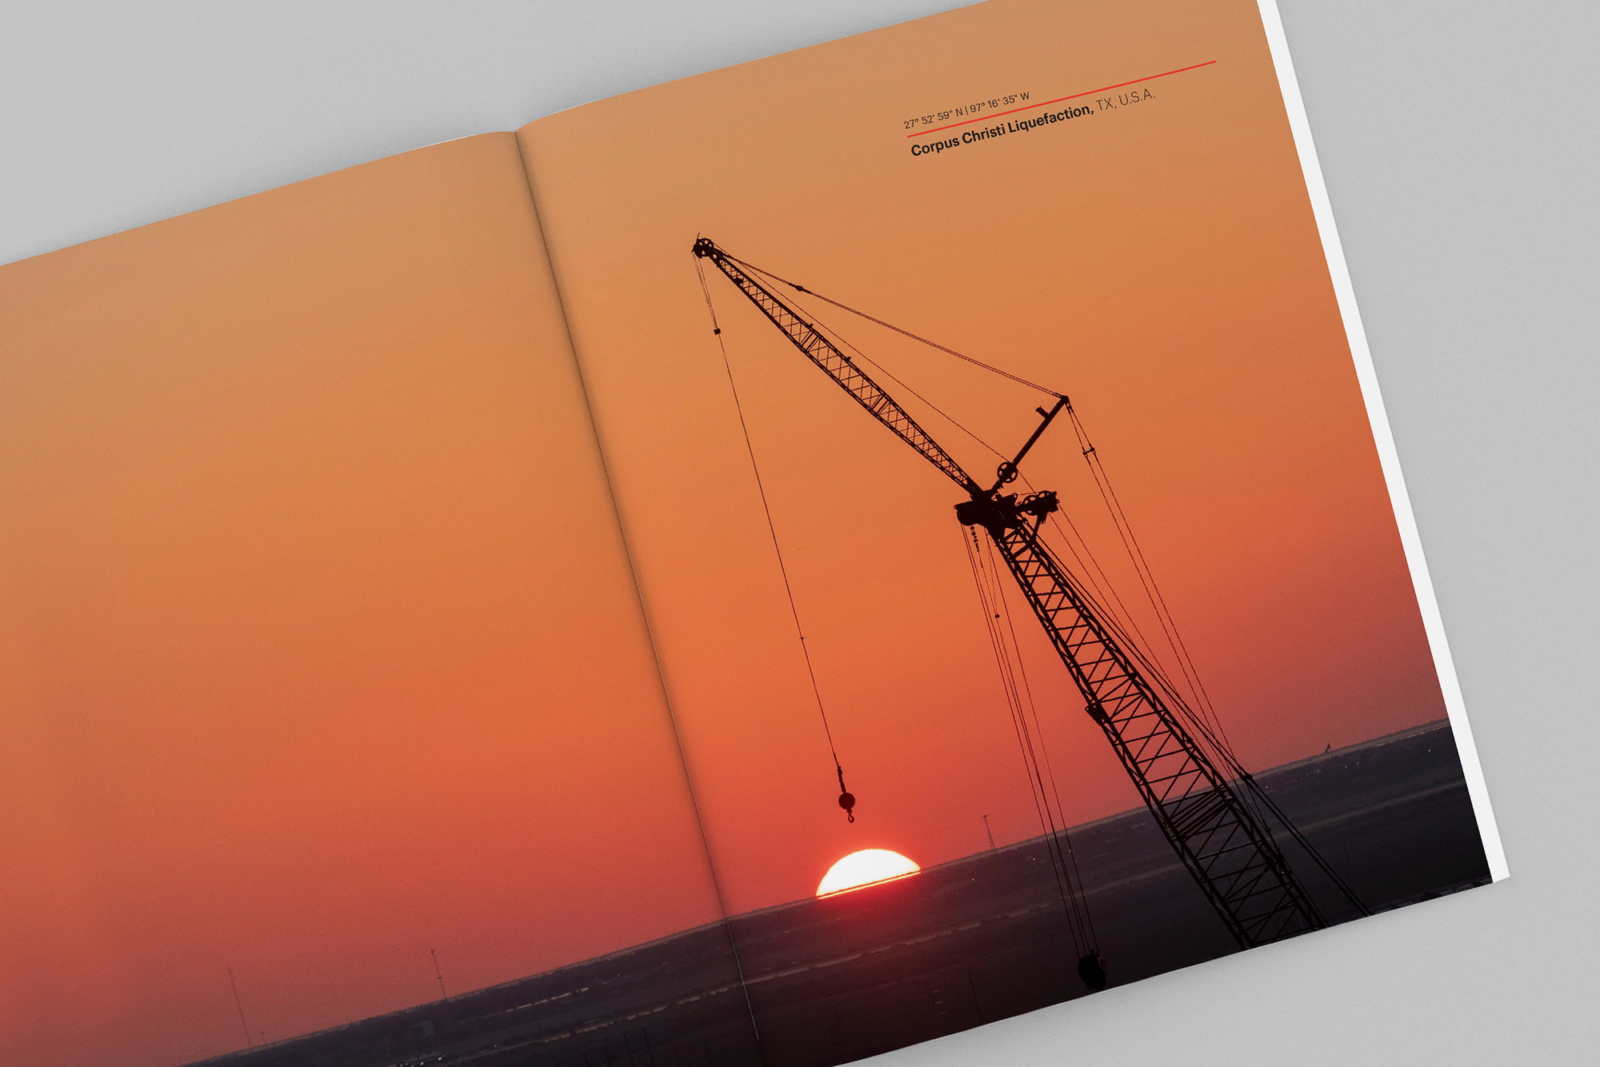 Full-bleed spread in the annual report design showing photograph of Bechtel's Corpus Christi Liquefaction